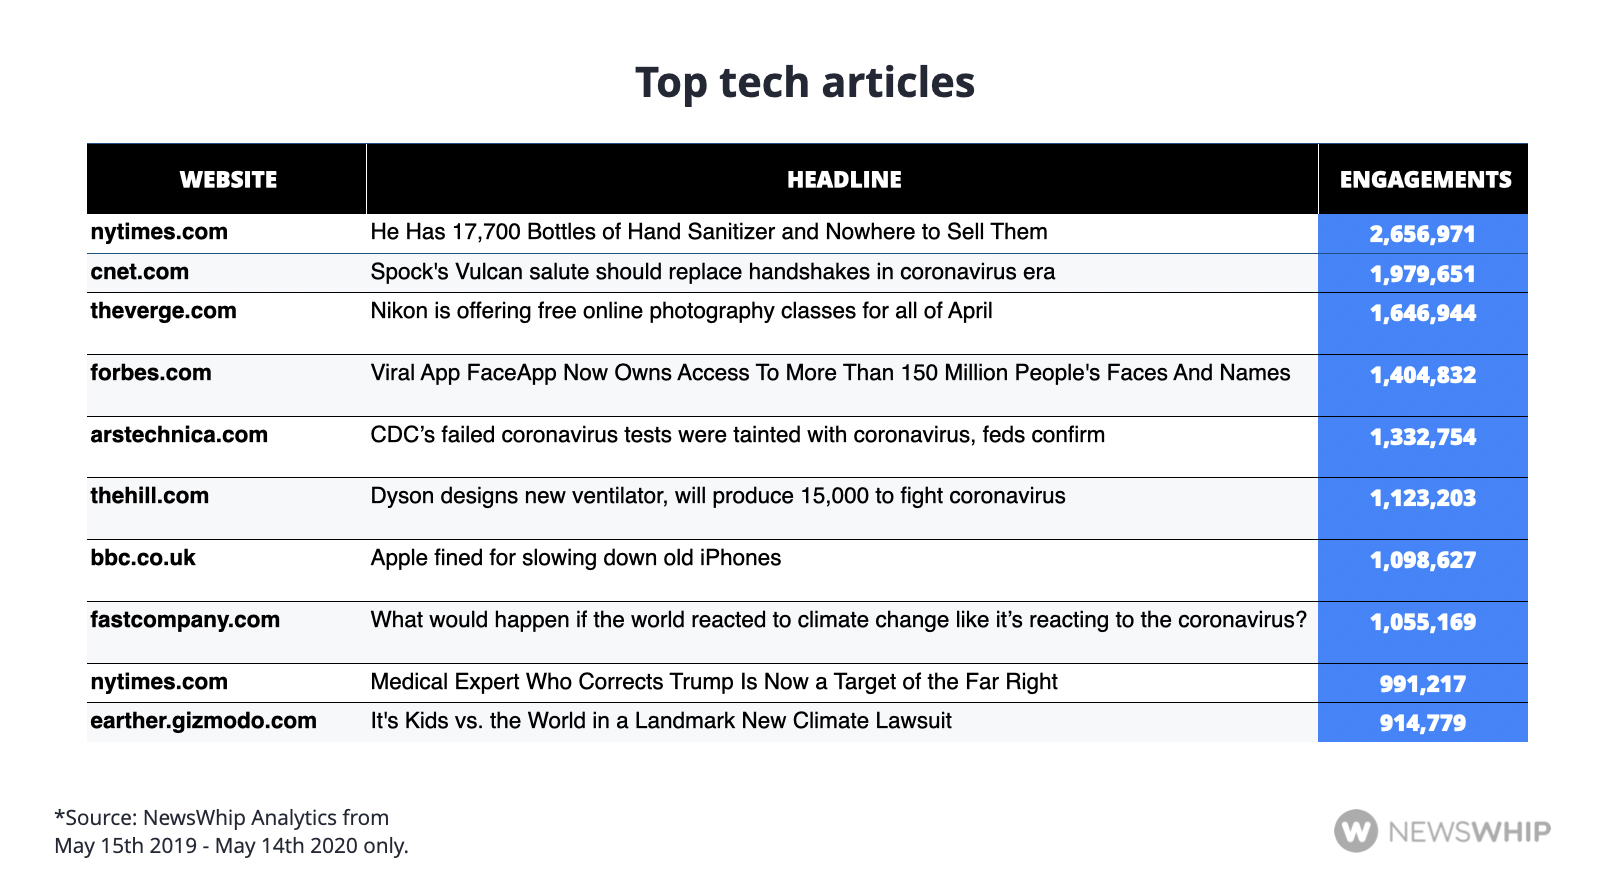 Chart showing the most engaged tech articles of the last year